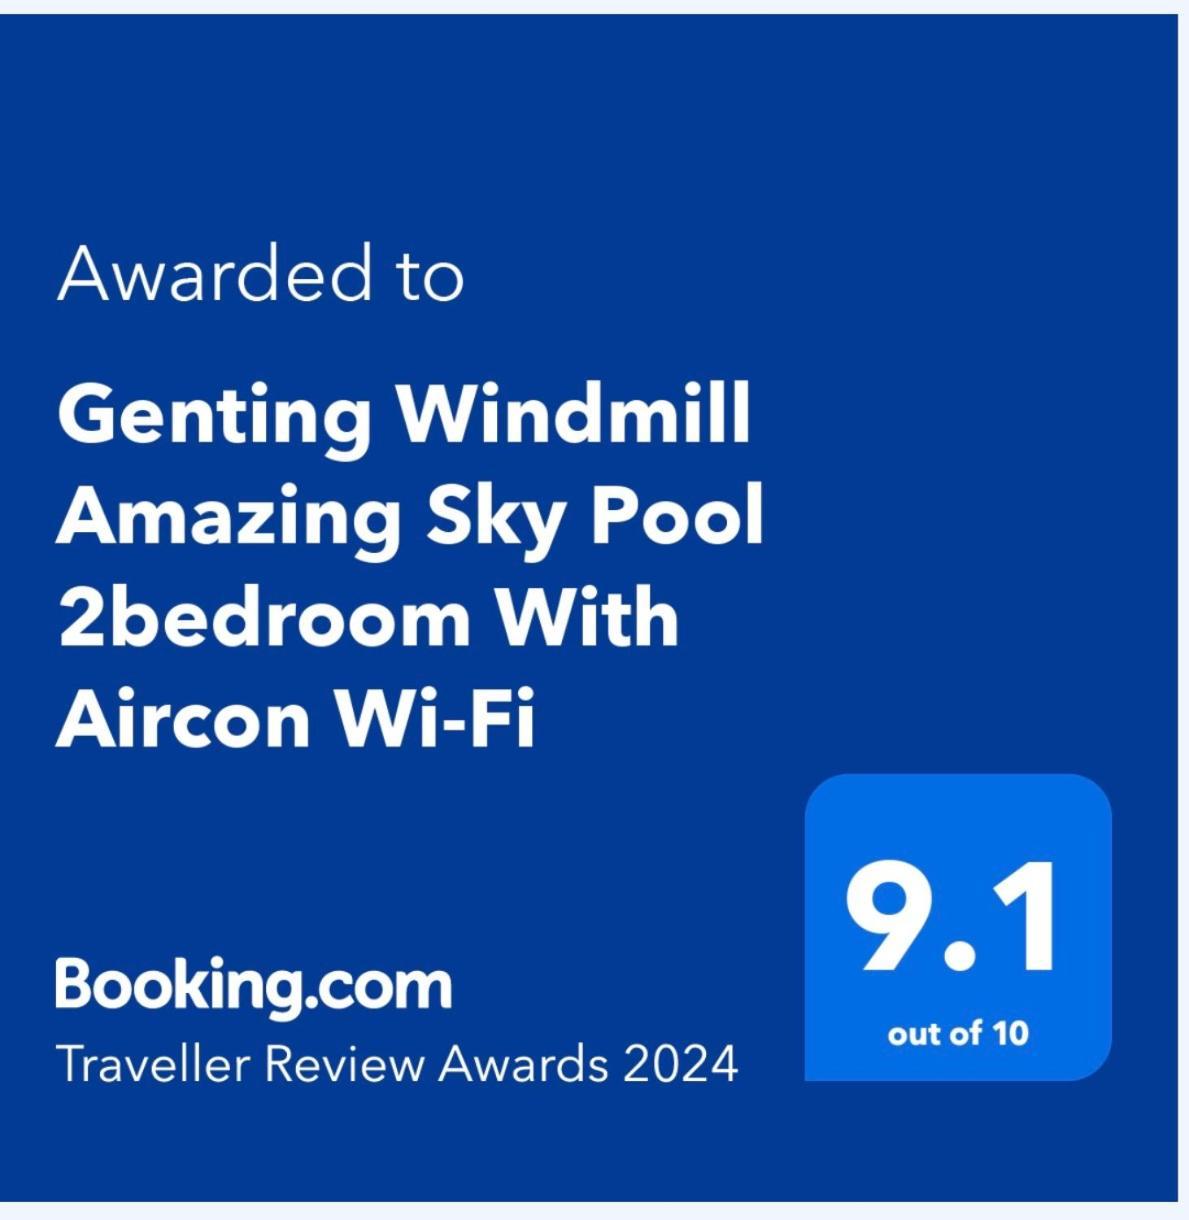 Genting Windmill Amazing Sky Pool 2Bedroom With Aircon Wi-Fi 云顶高原 外观 照片